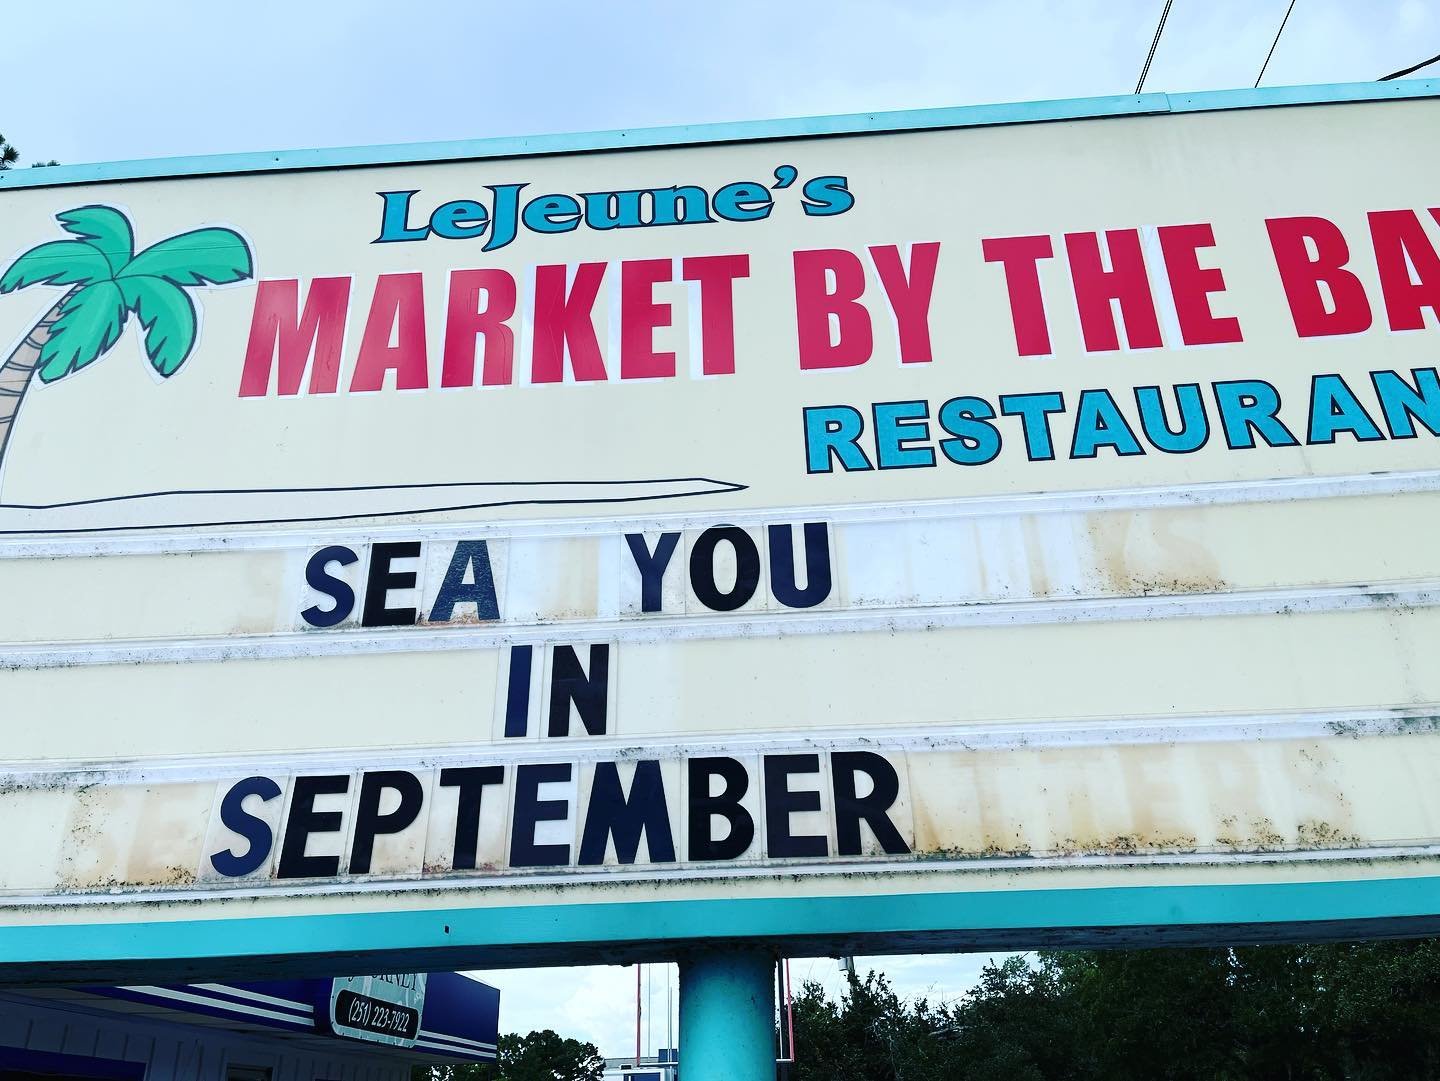 LeJeune's Market by the Bay restaurant was a Daphne staple for 19 years before closing July 9. Market by the Bay will get a second chance with new owners.